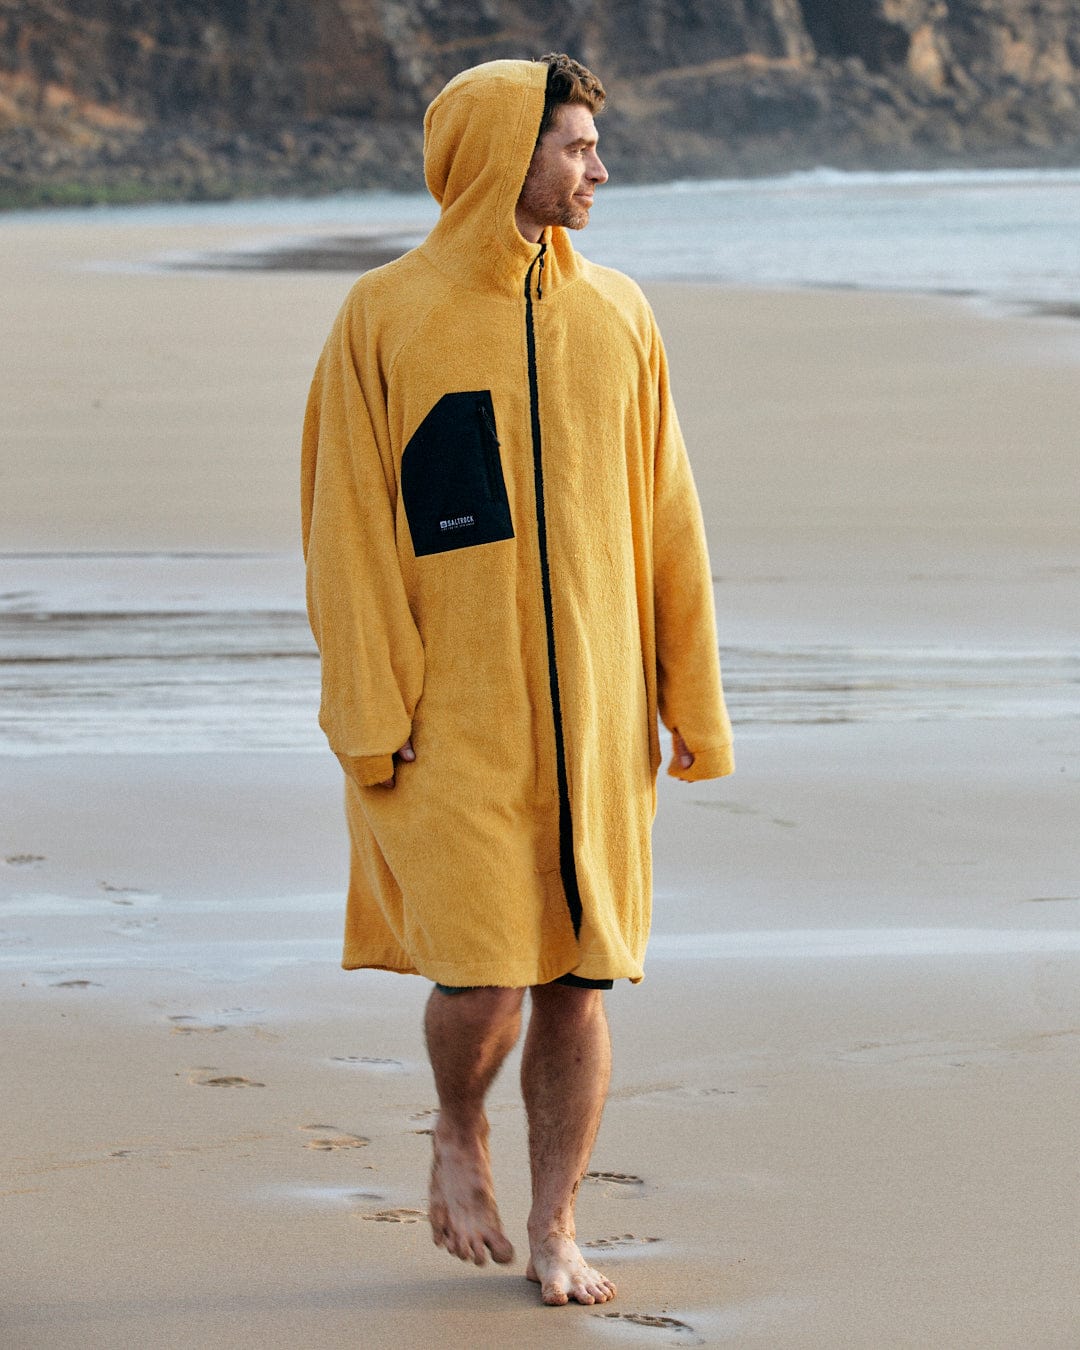 A man in a Saltrock 3 in 1 Recycled Four Seasons Changing Robe - Black/Yellow stands barefoot on a sandy beach, looking to his left with a serene expression.